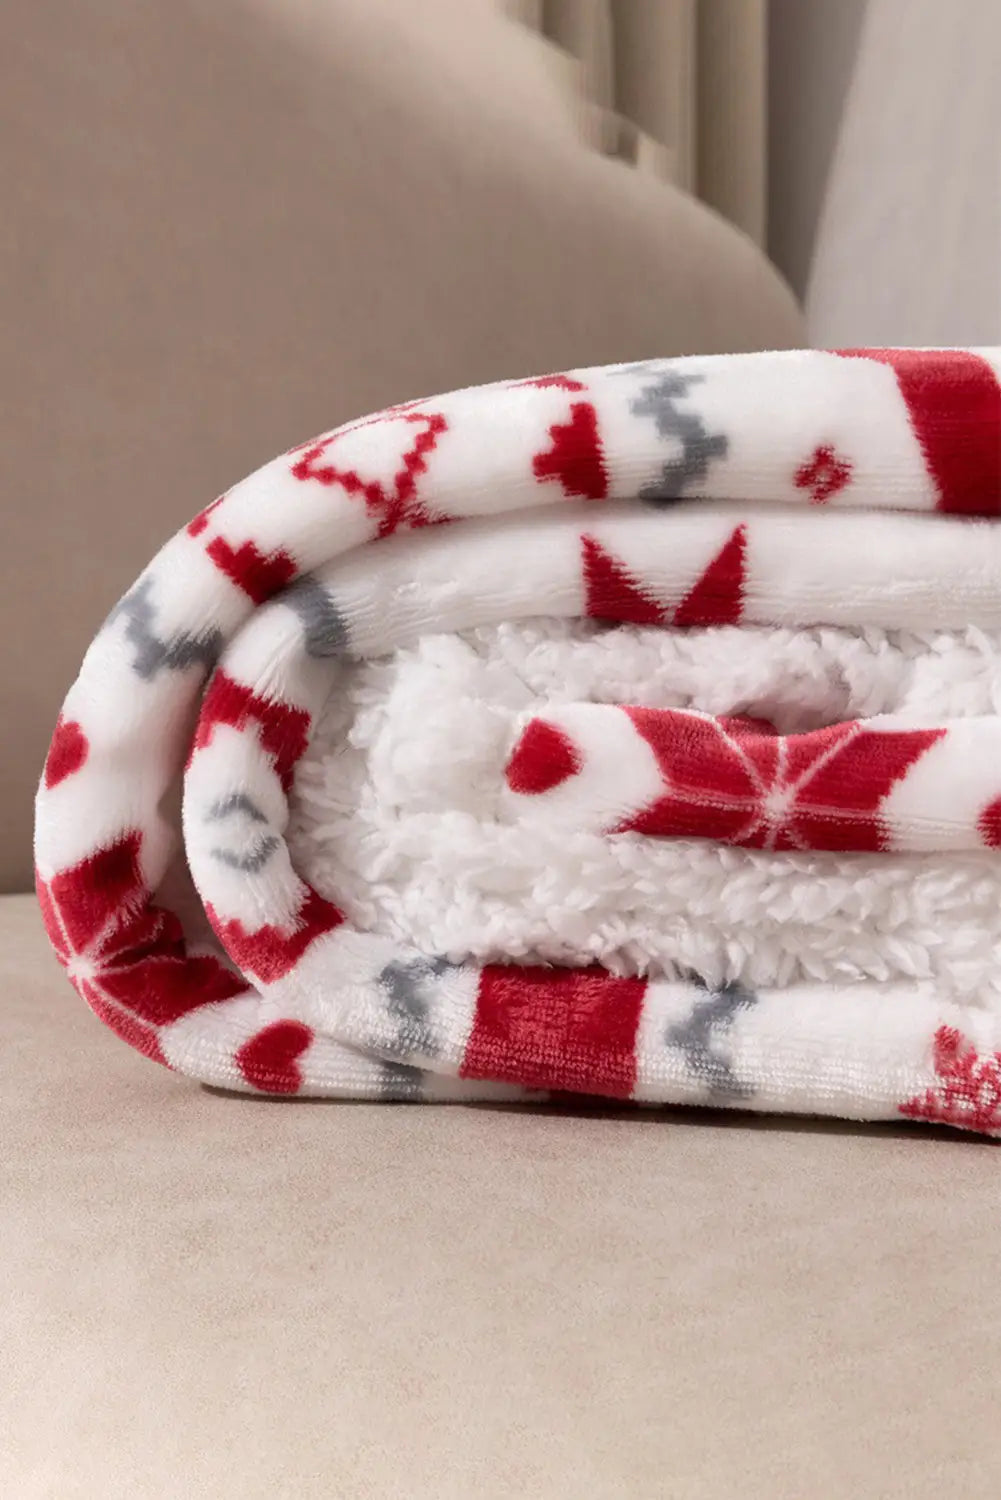 White christmas reindeer snowflake printed sherpa blanket - one size / 100% polyester - gifts